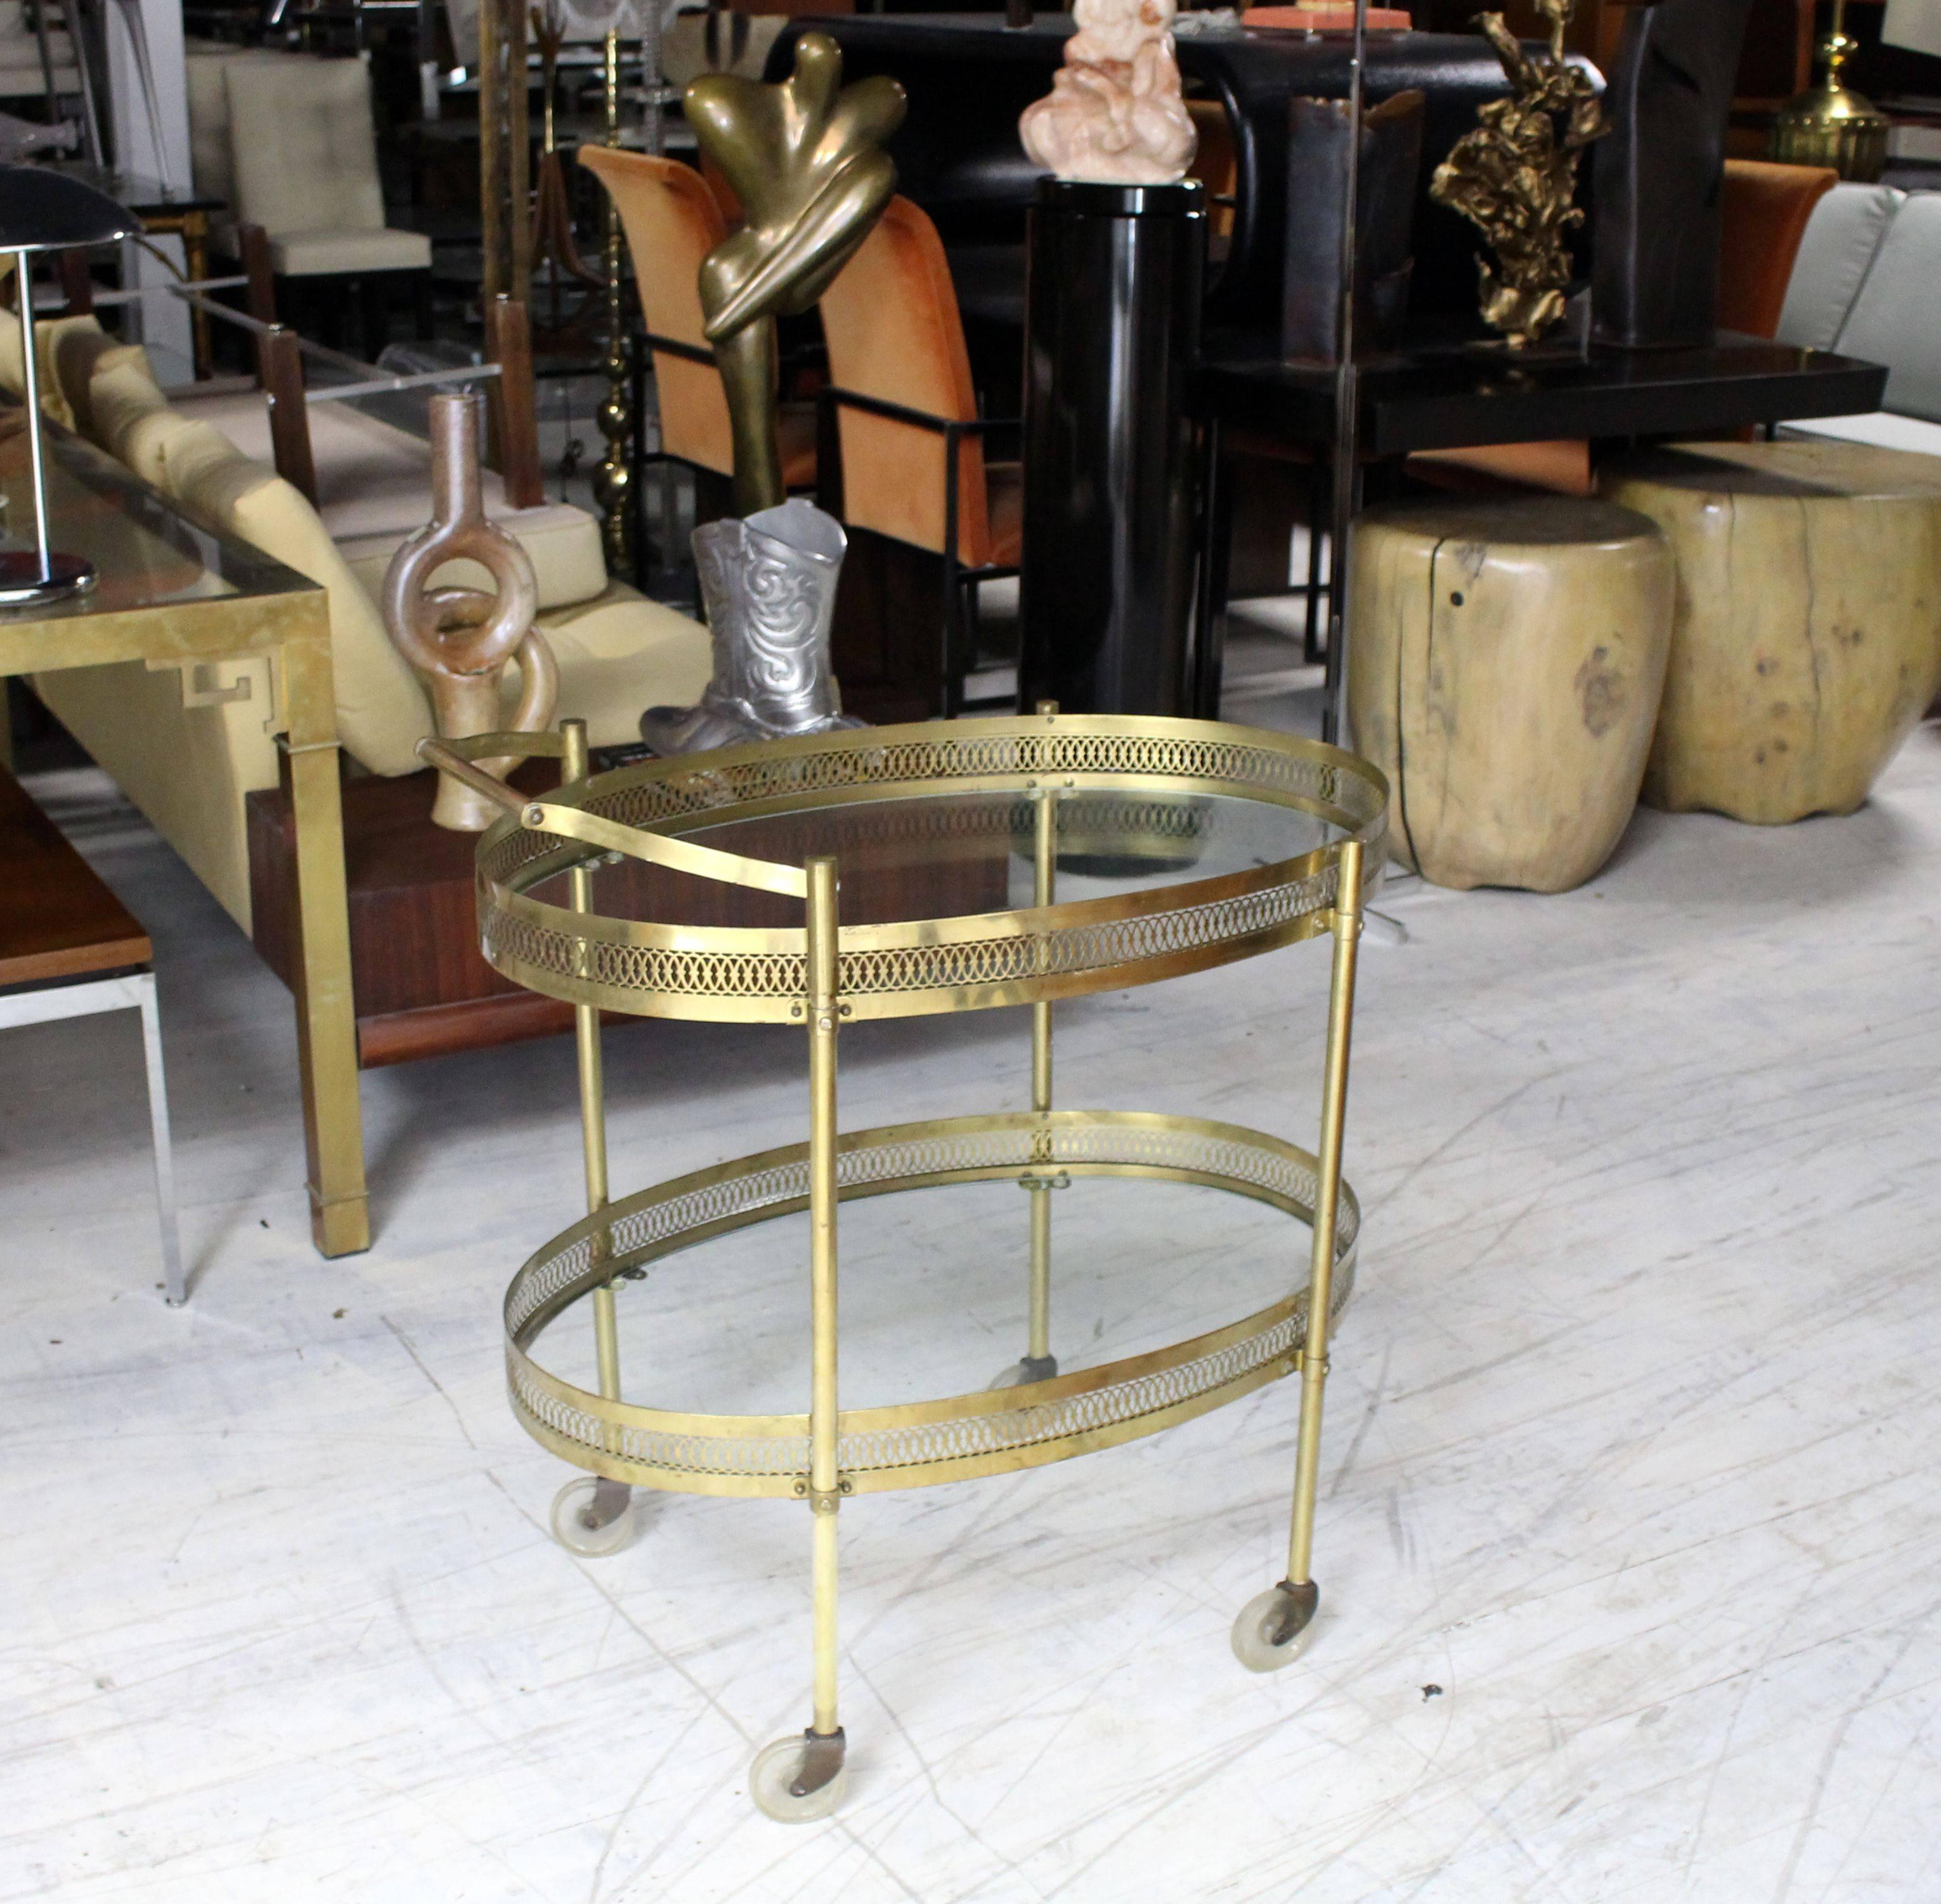 Mid-Century Modern Oval Pierced Brass and Glass Two-Tier Tea Serving Cart on Wheels